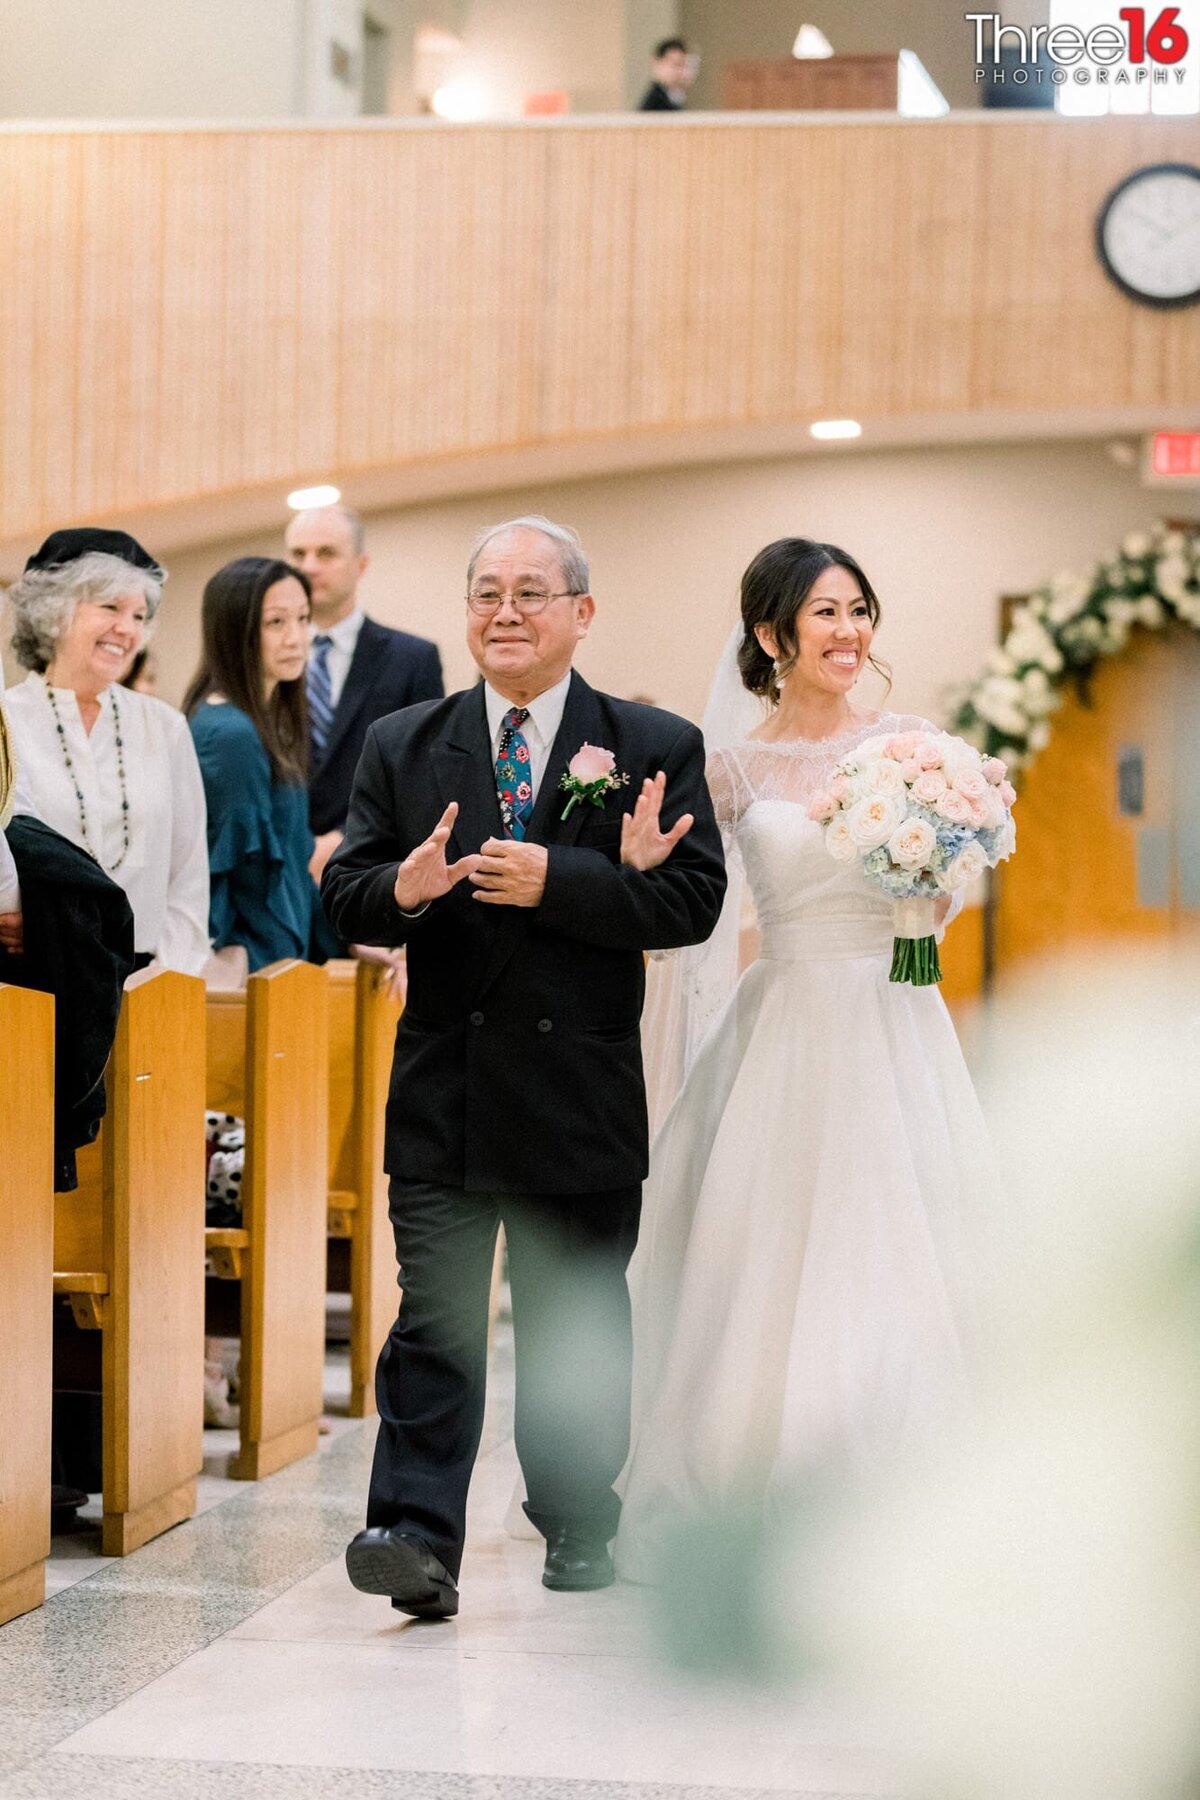 Bride is escorted down the aisle by her father